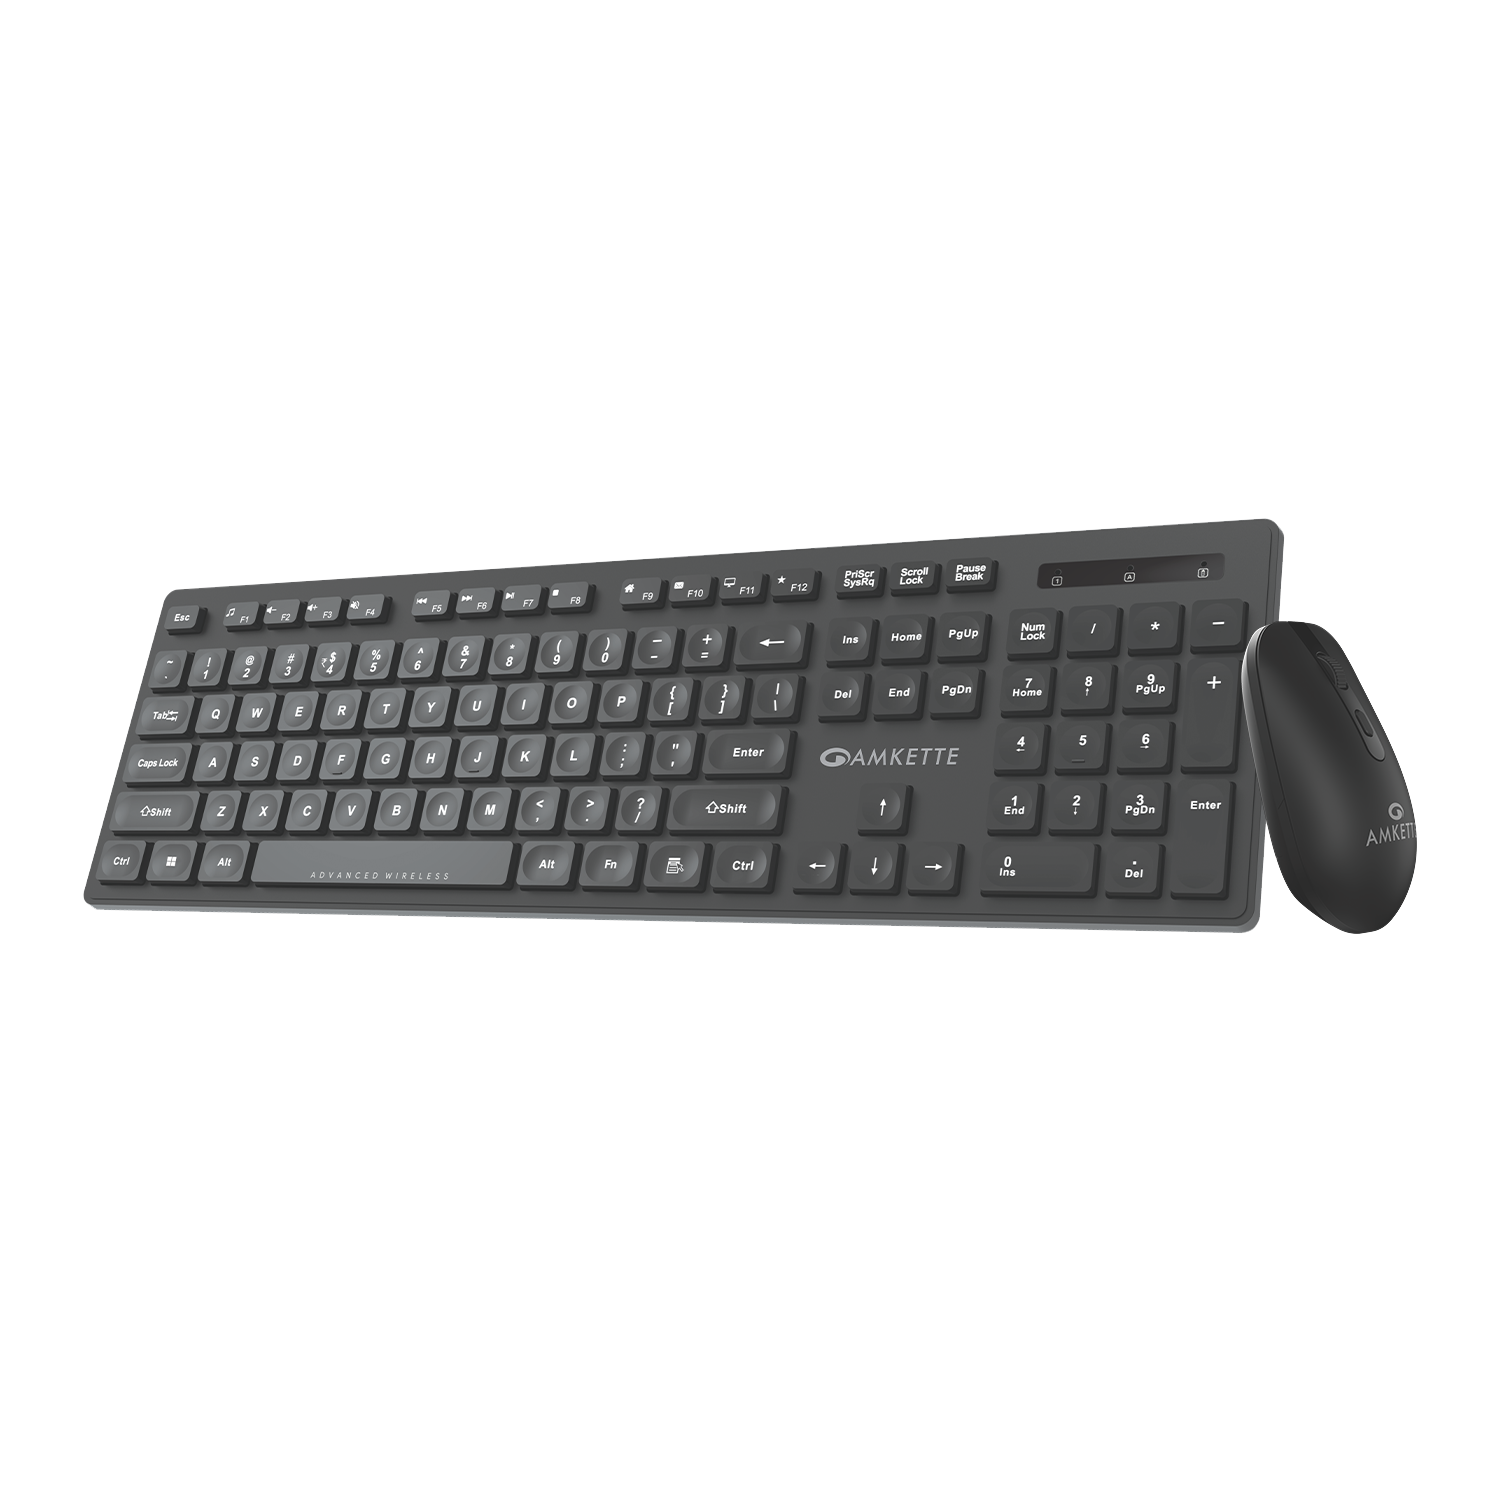 Primus Neo Wireless Keyboard and Mouse Combo